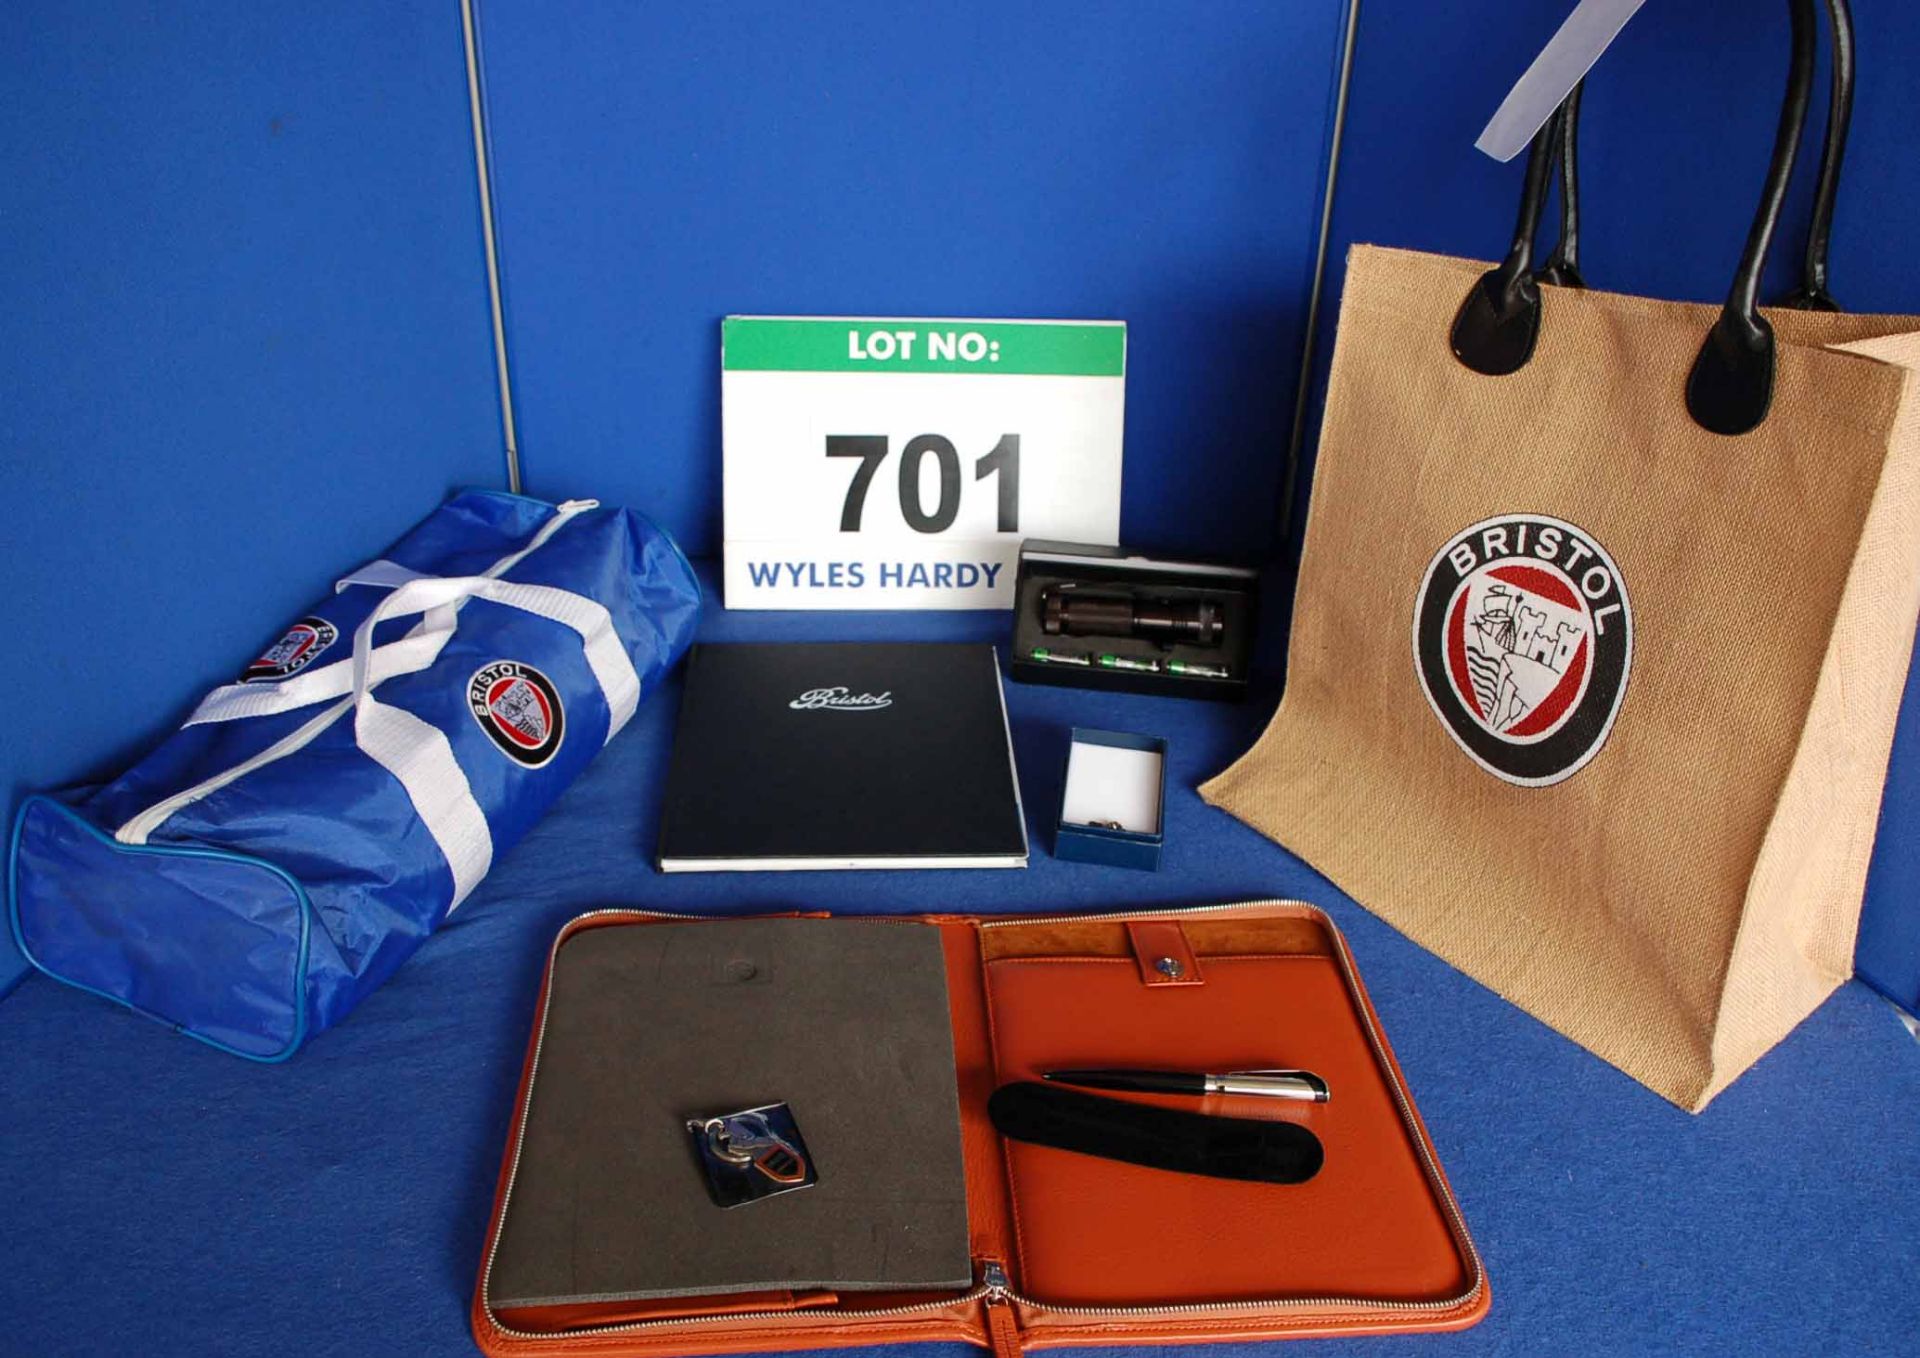 A Bristol Cars Merchandise Package comprising A Bristol Branded Hessian Bag containing A Bristol